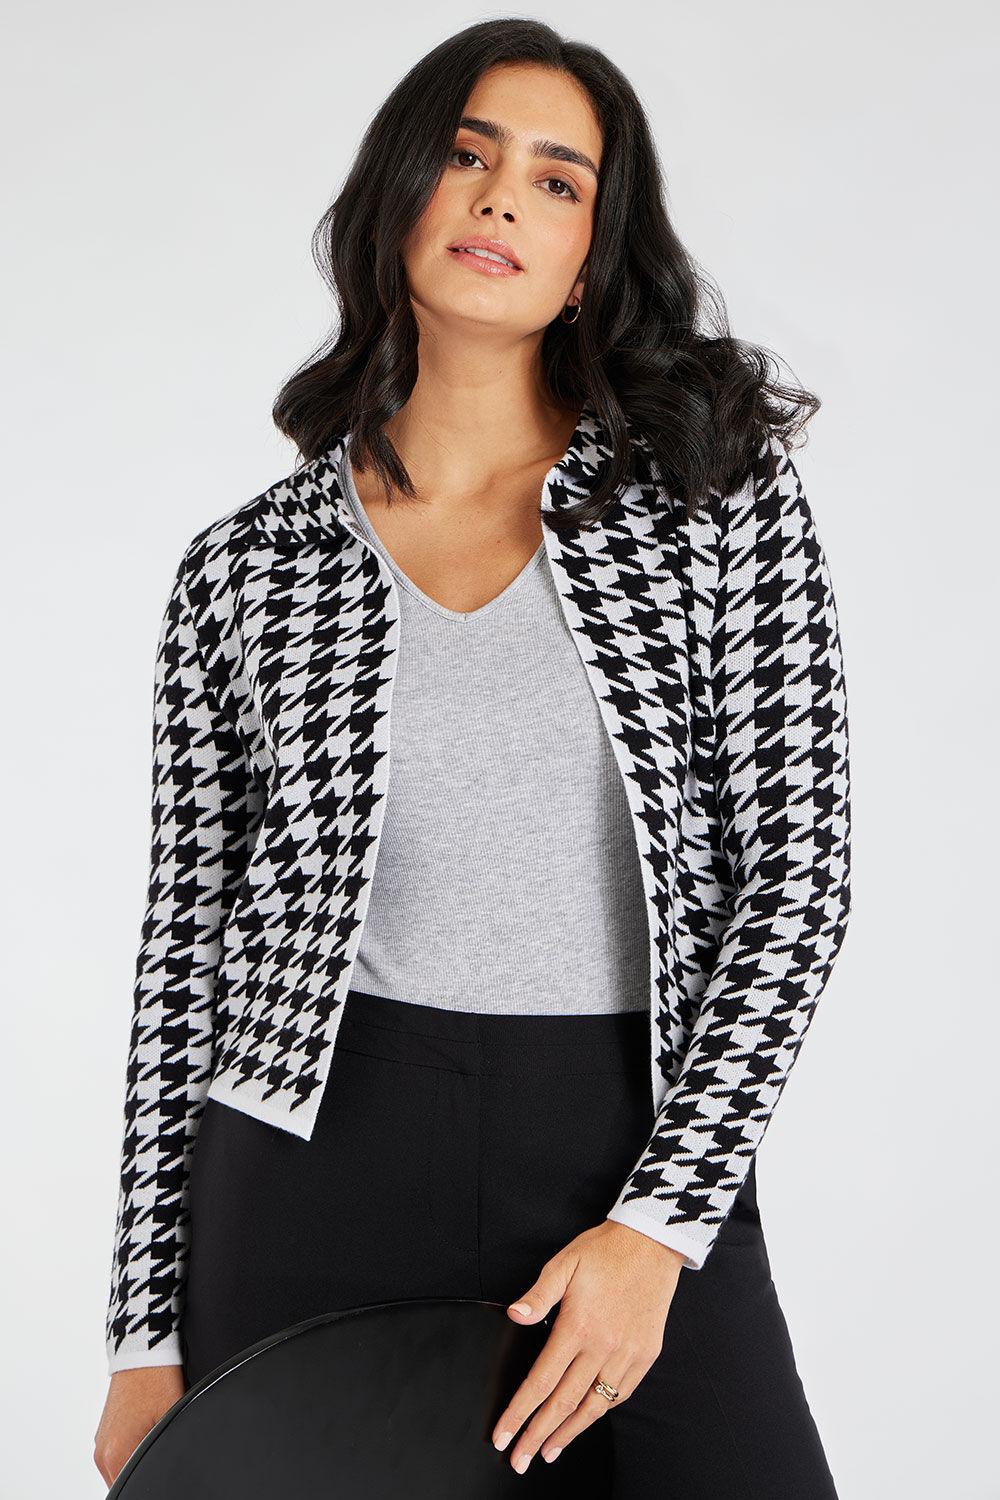 Bonmarche Black Houndstooth Collared Jacquard Cardigan, Size: 12